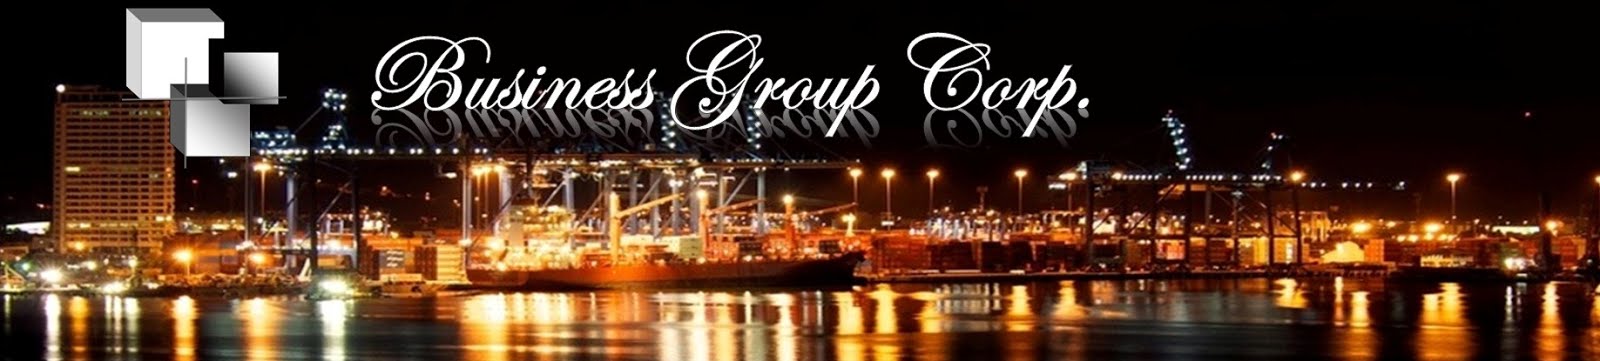 Business Group Corp